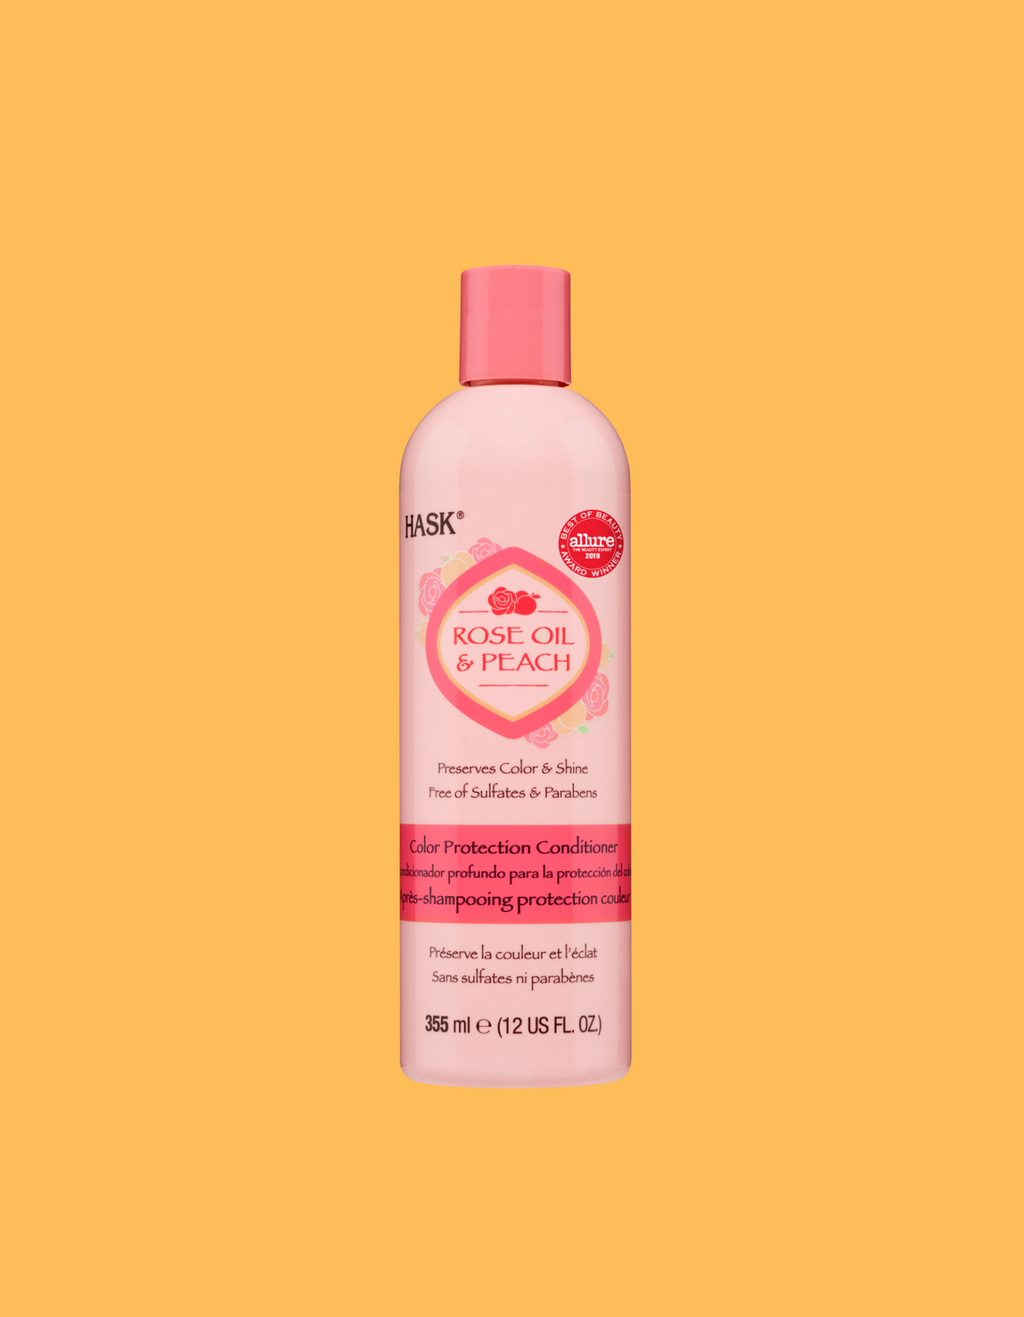 Hask Rose Oil & Peach Color Protection Conditioner